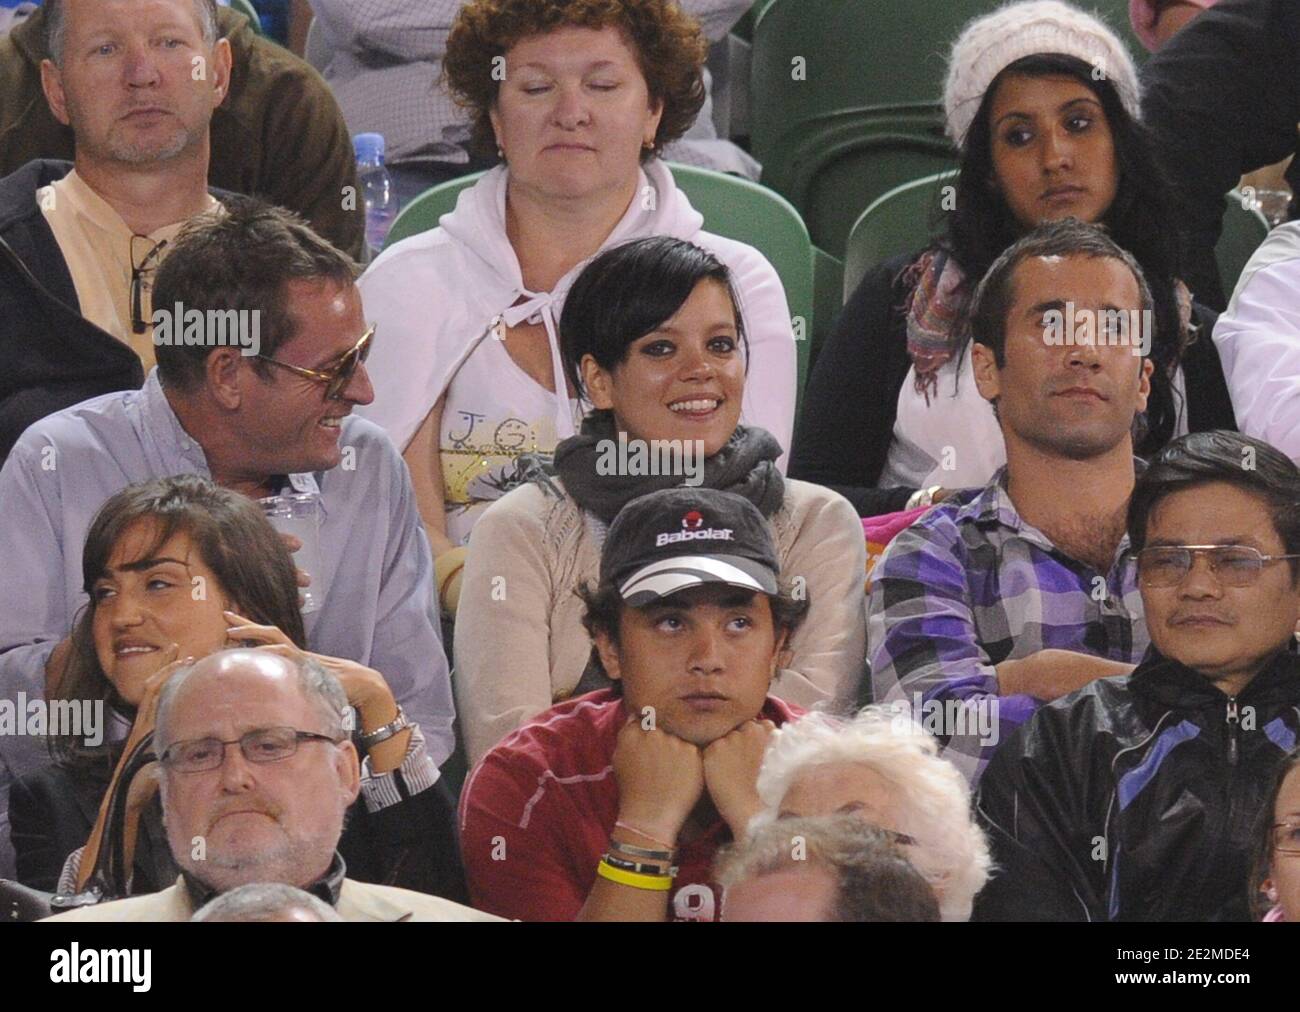 British singer Lily Allen watches the quarterfinal match between France's Jo-Wilfried Tsonga against Serbia's Novak Djokovic on day 10 of the Australian Open tennis tournament in Melbourne, Australia on January 27, 2010. Jo-Wilfried Tsonga moved into the Australian Open semi-finals. Photo by Corinne Dubreuil/Cameleon/ABACAPRESS.COM Stock Photo